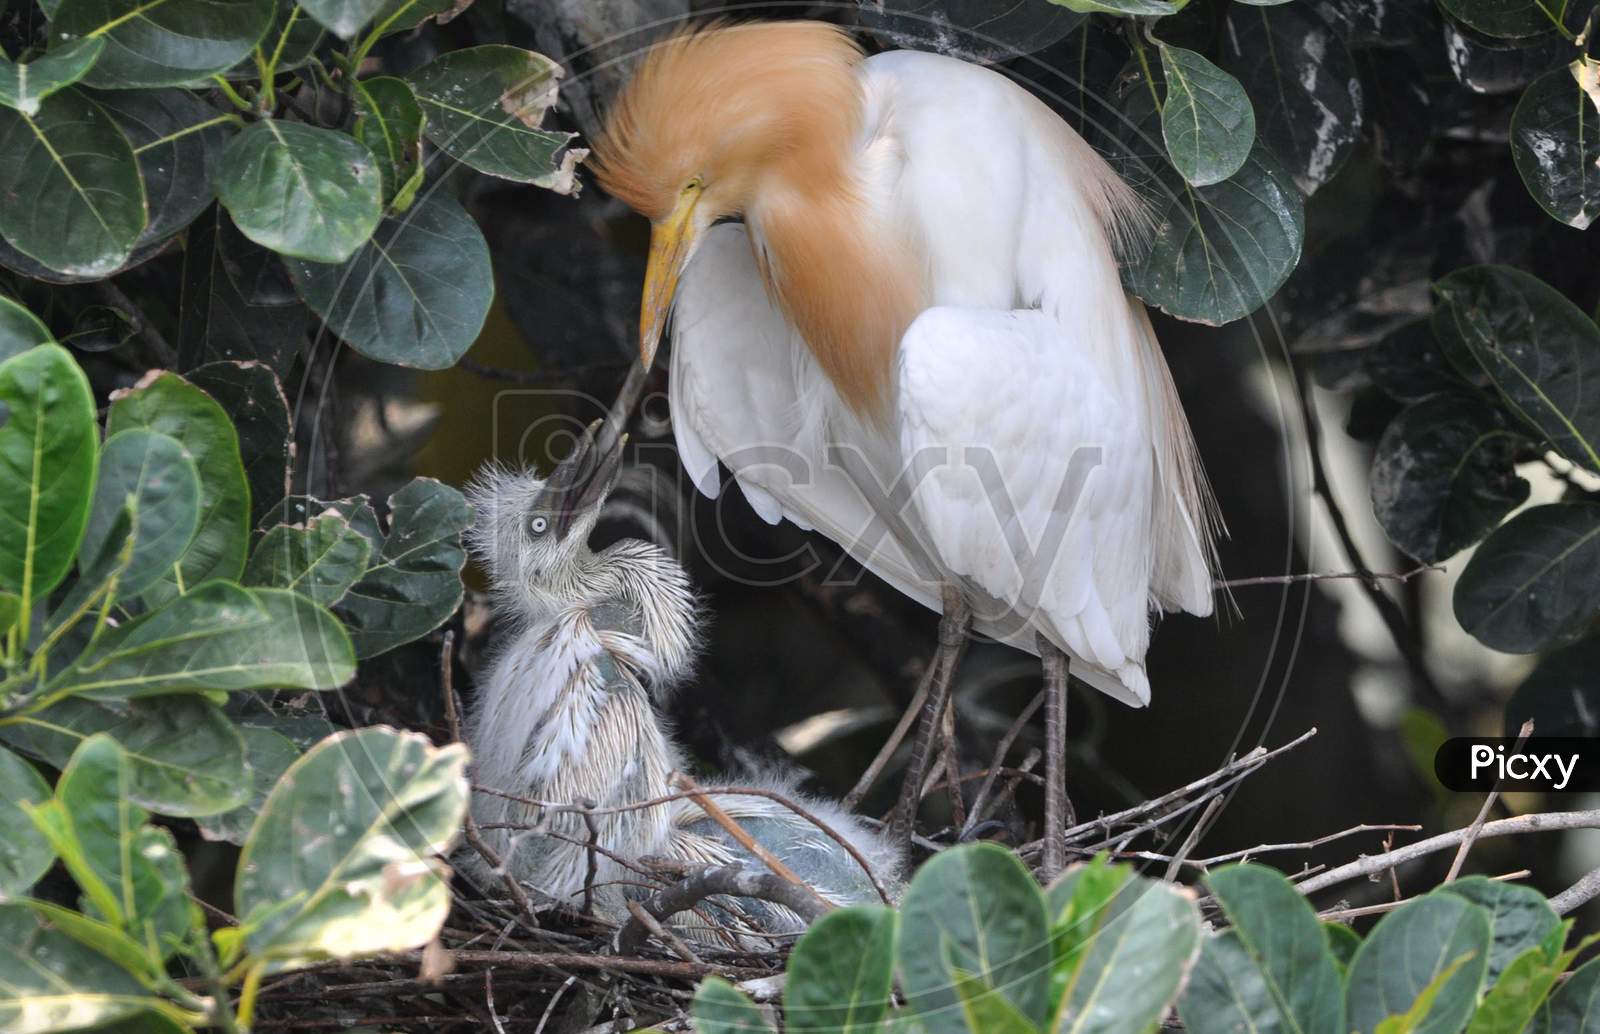 An Egret Feeds Her Chicks In A Nest On The Banks Of The Brahmaputra River In Pan Bazar Area Of Guwahati, May 5, 2020.